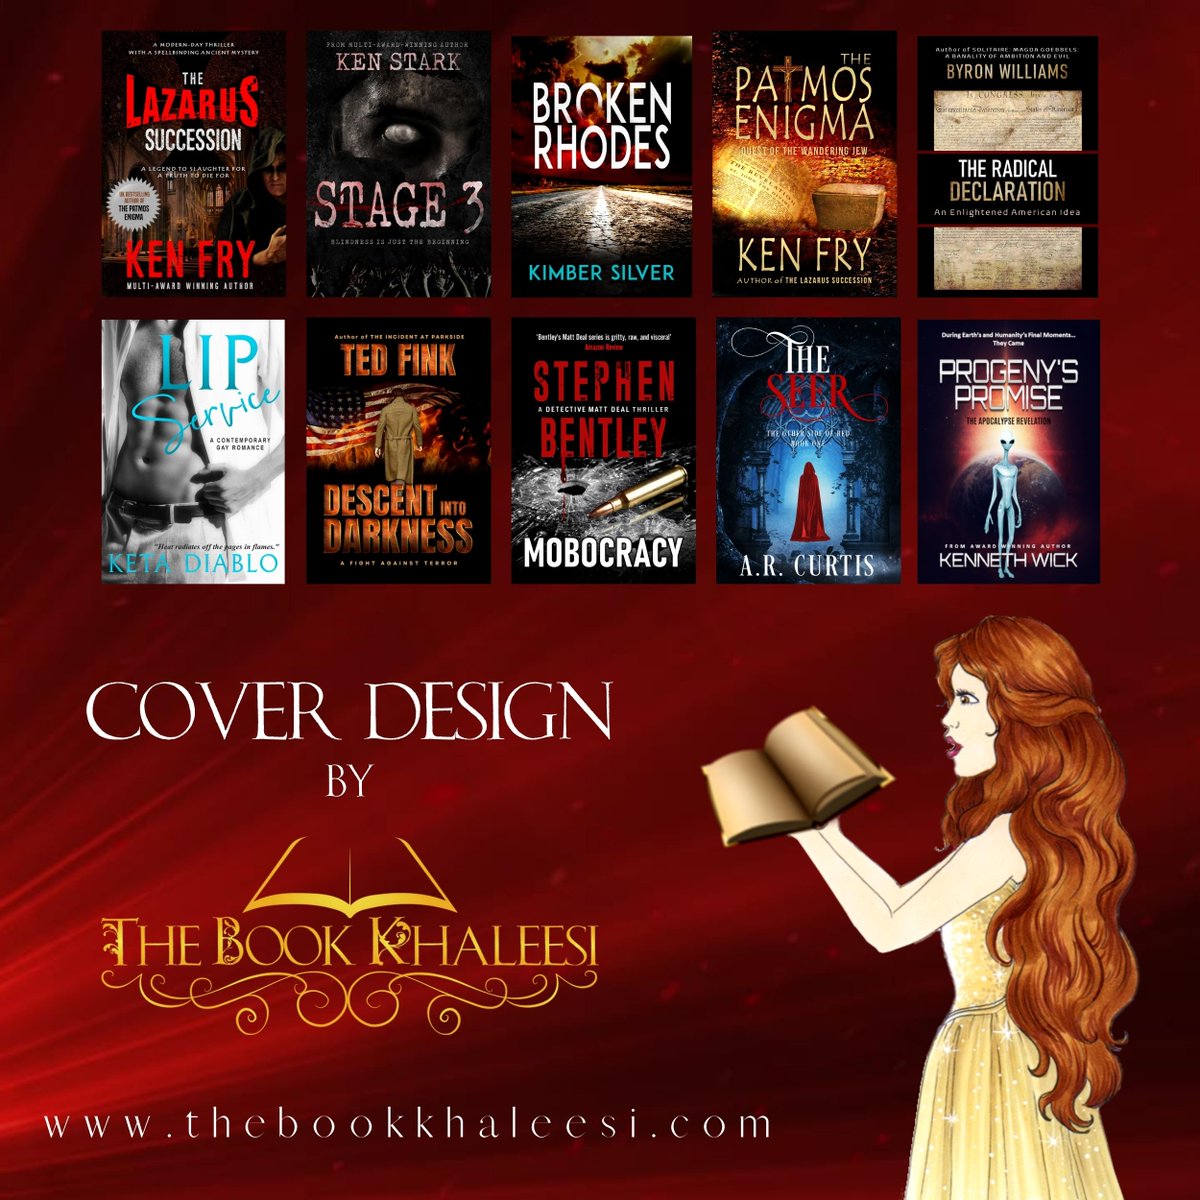 Professional and eye-catching designs encourage viewers to interact with your content. Whether it's through sales, likes, shares, or clicks, a well-designed cover can prompt users to take ACTION. thebookkhaleesi.com/2016/08/custom… #coverdesign #bookcovers #graphic #authors #bookmarketing